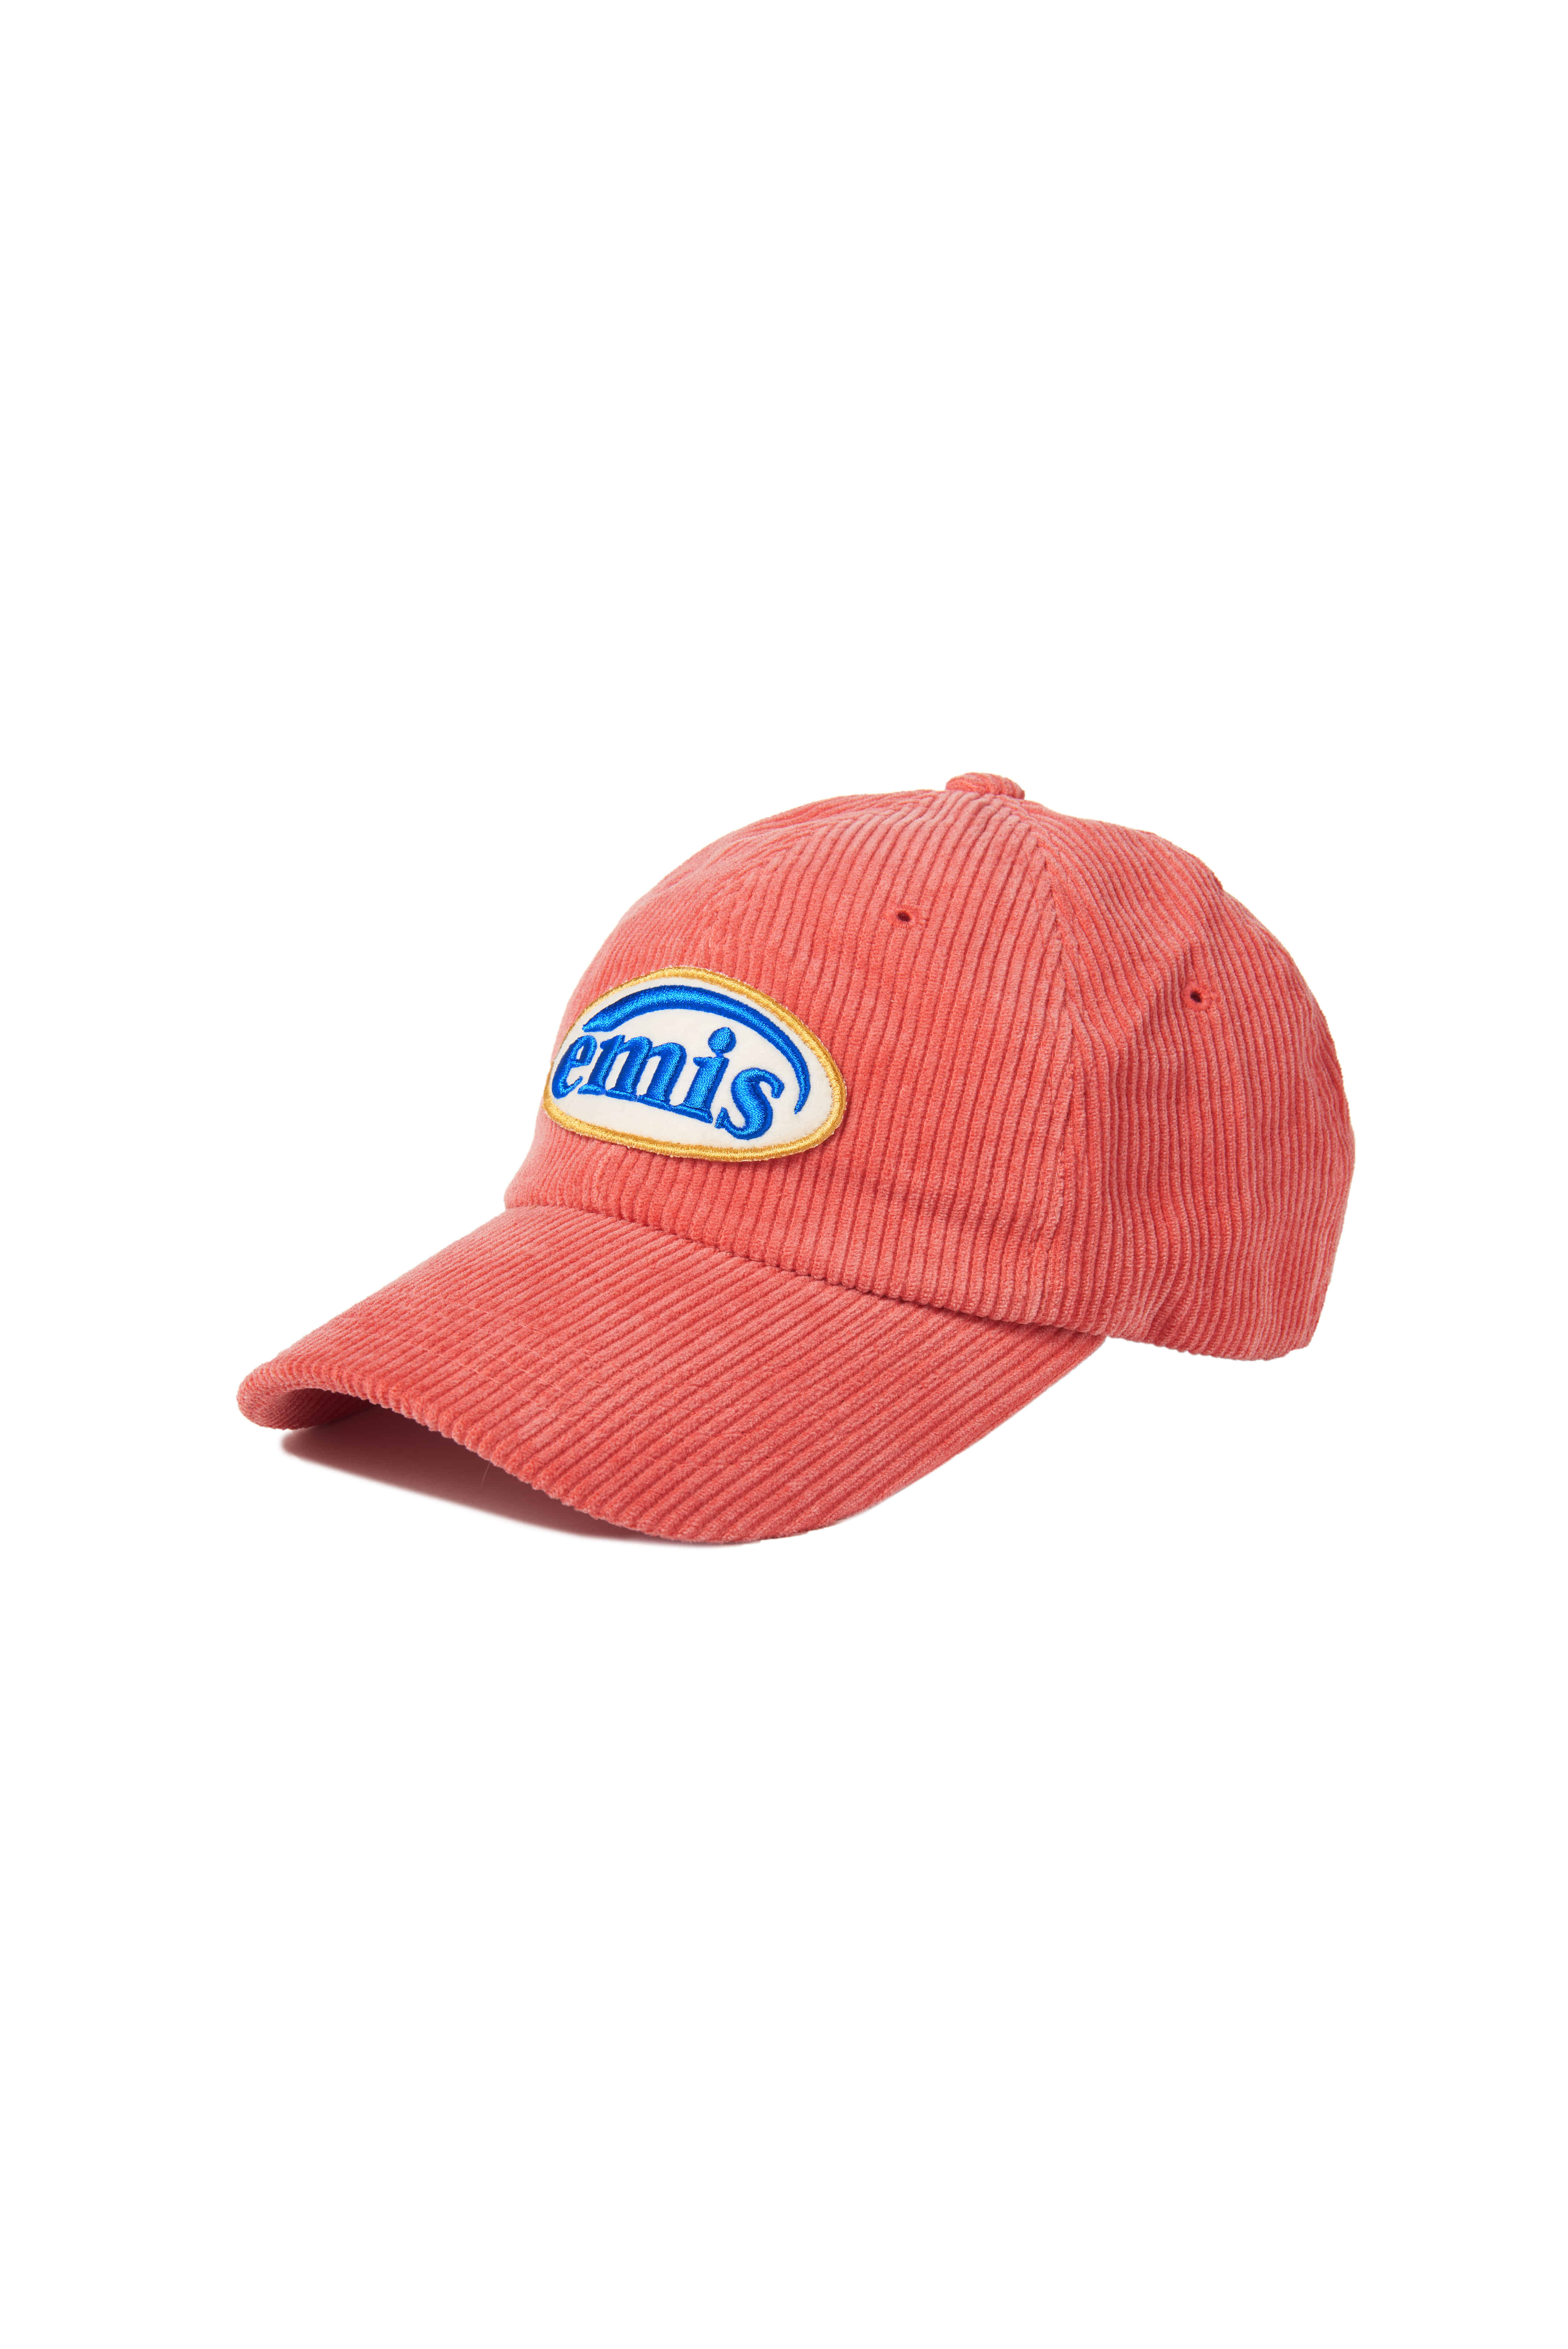 CORDUROY WAPPEN BALL CAP-CORAL RED